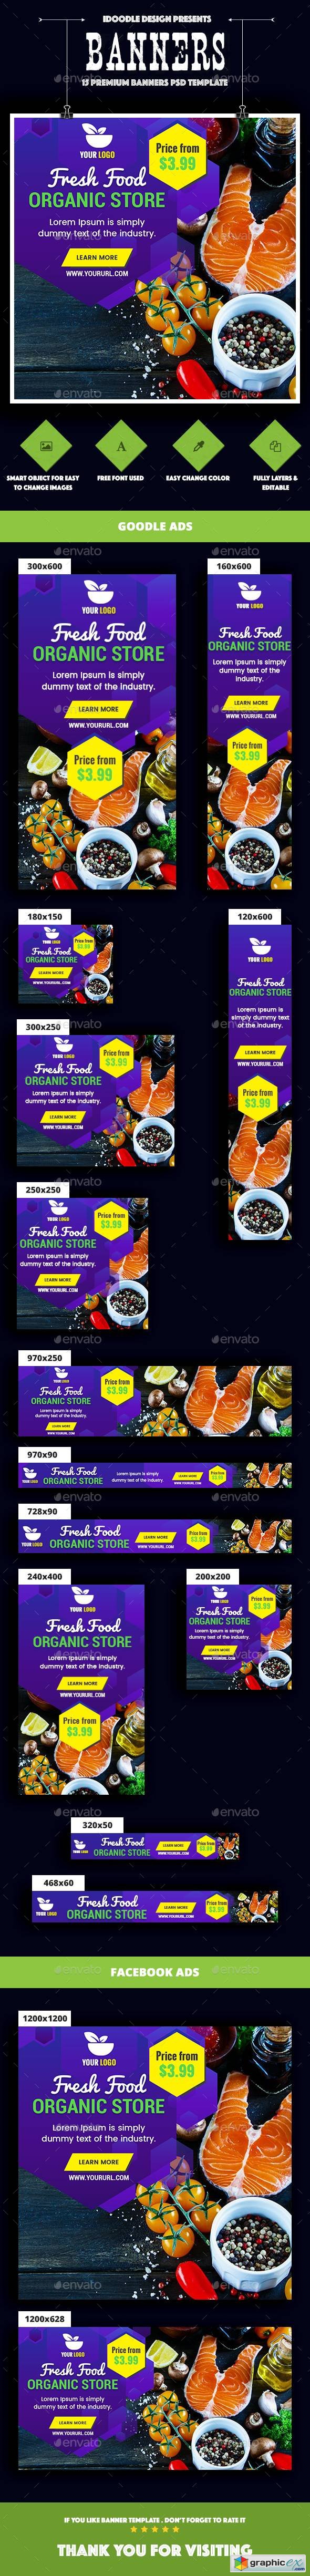 Food & Restaurant Banners Ad